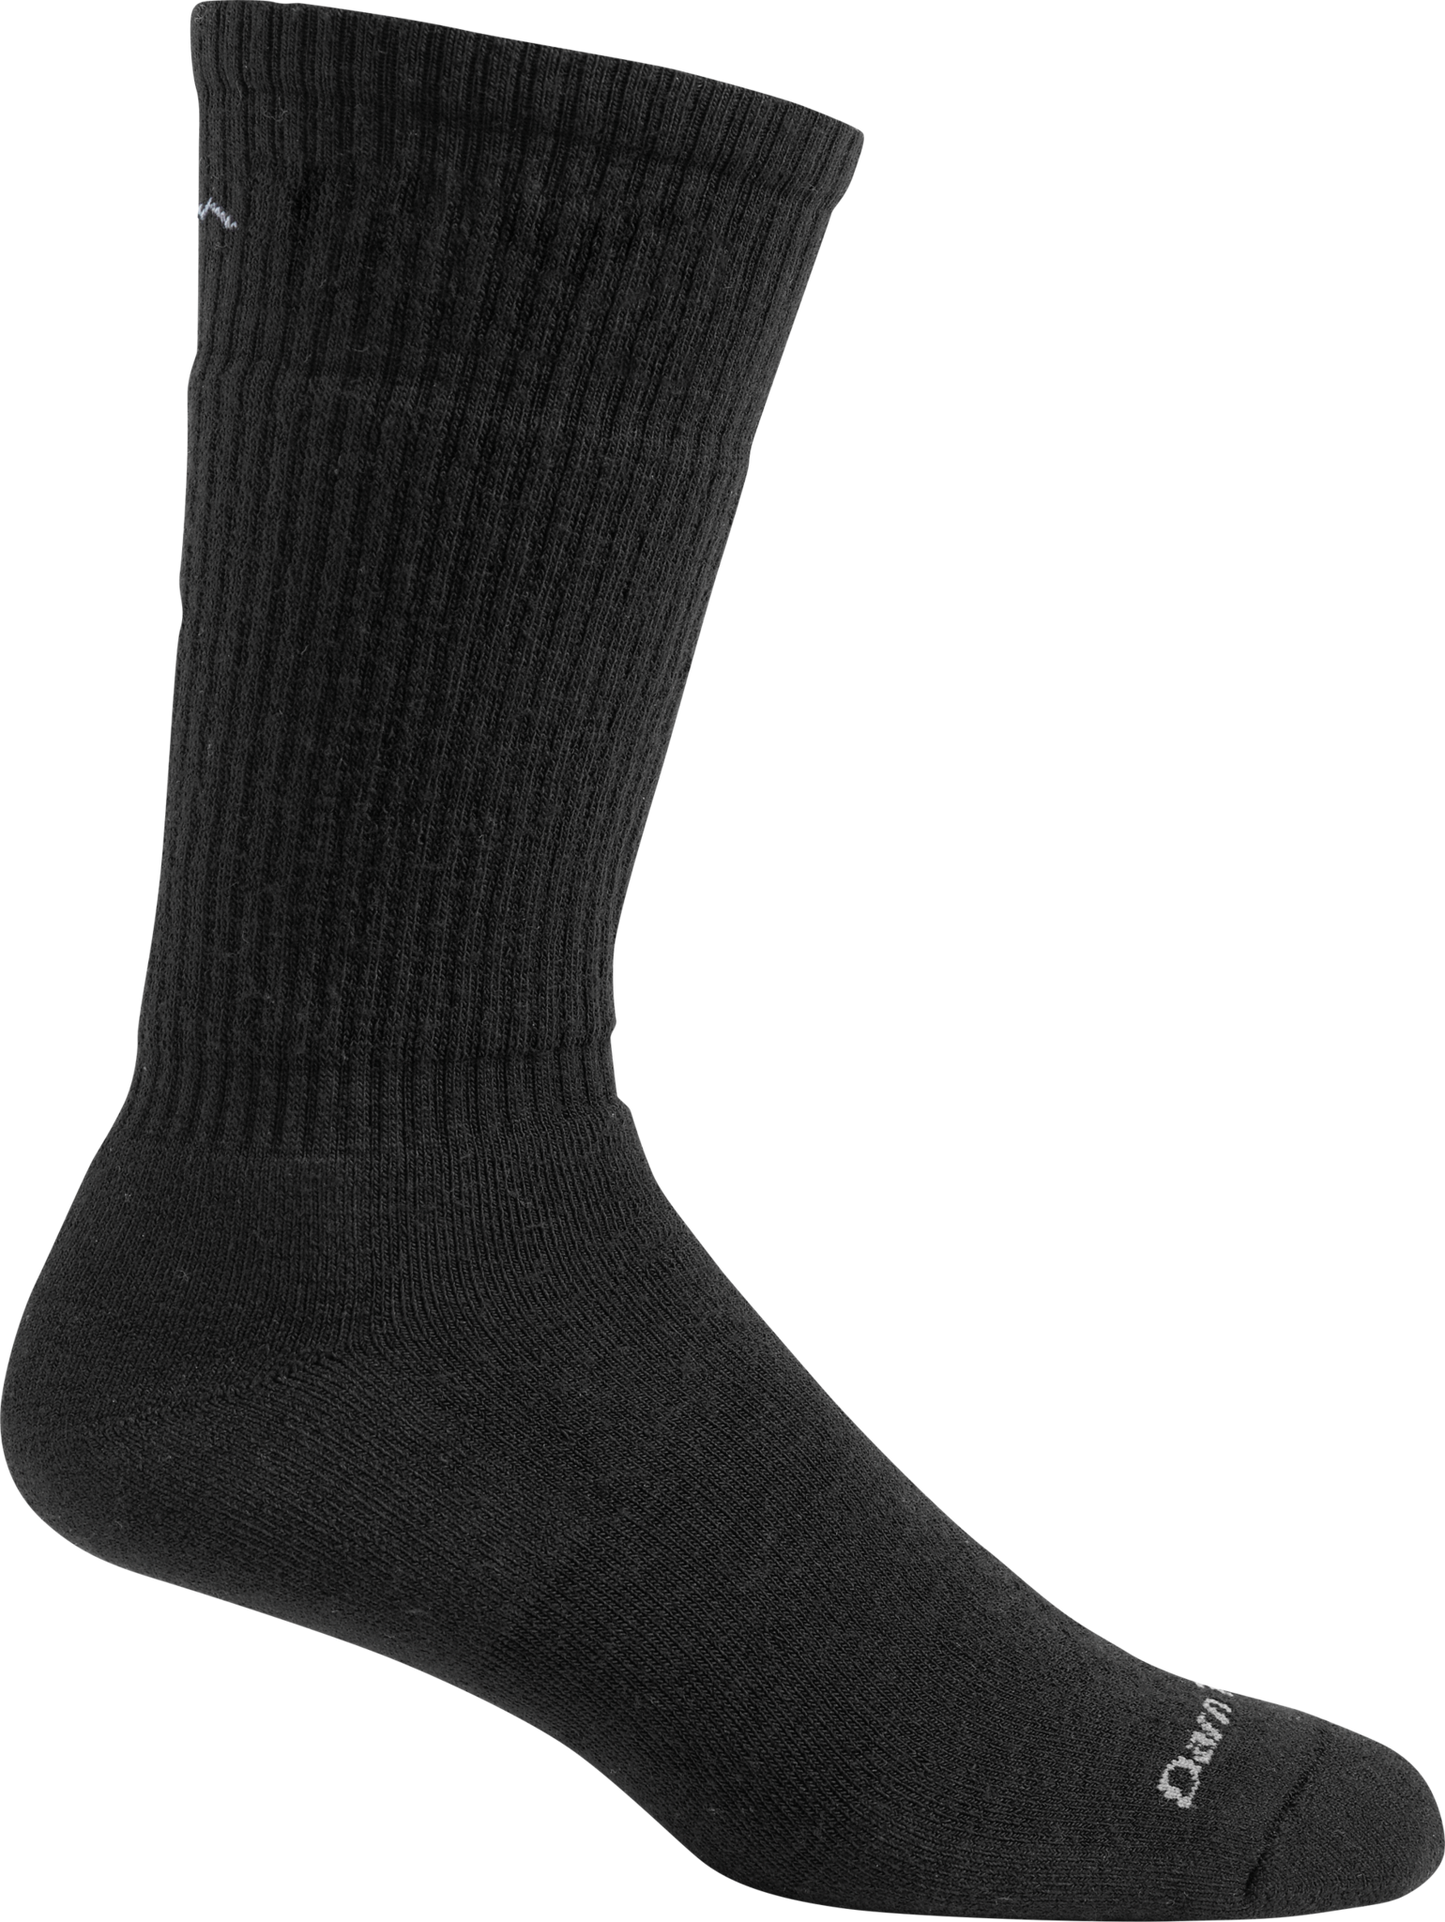 The Standard Mid-Calf Light with Cushion